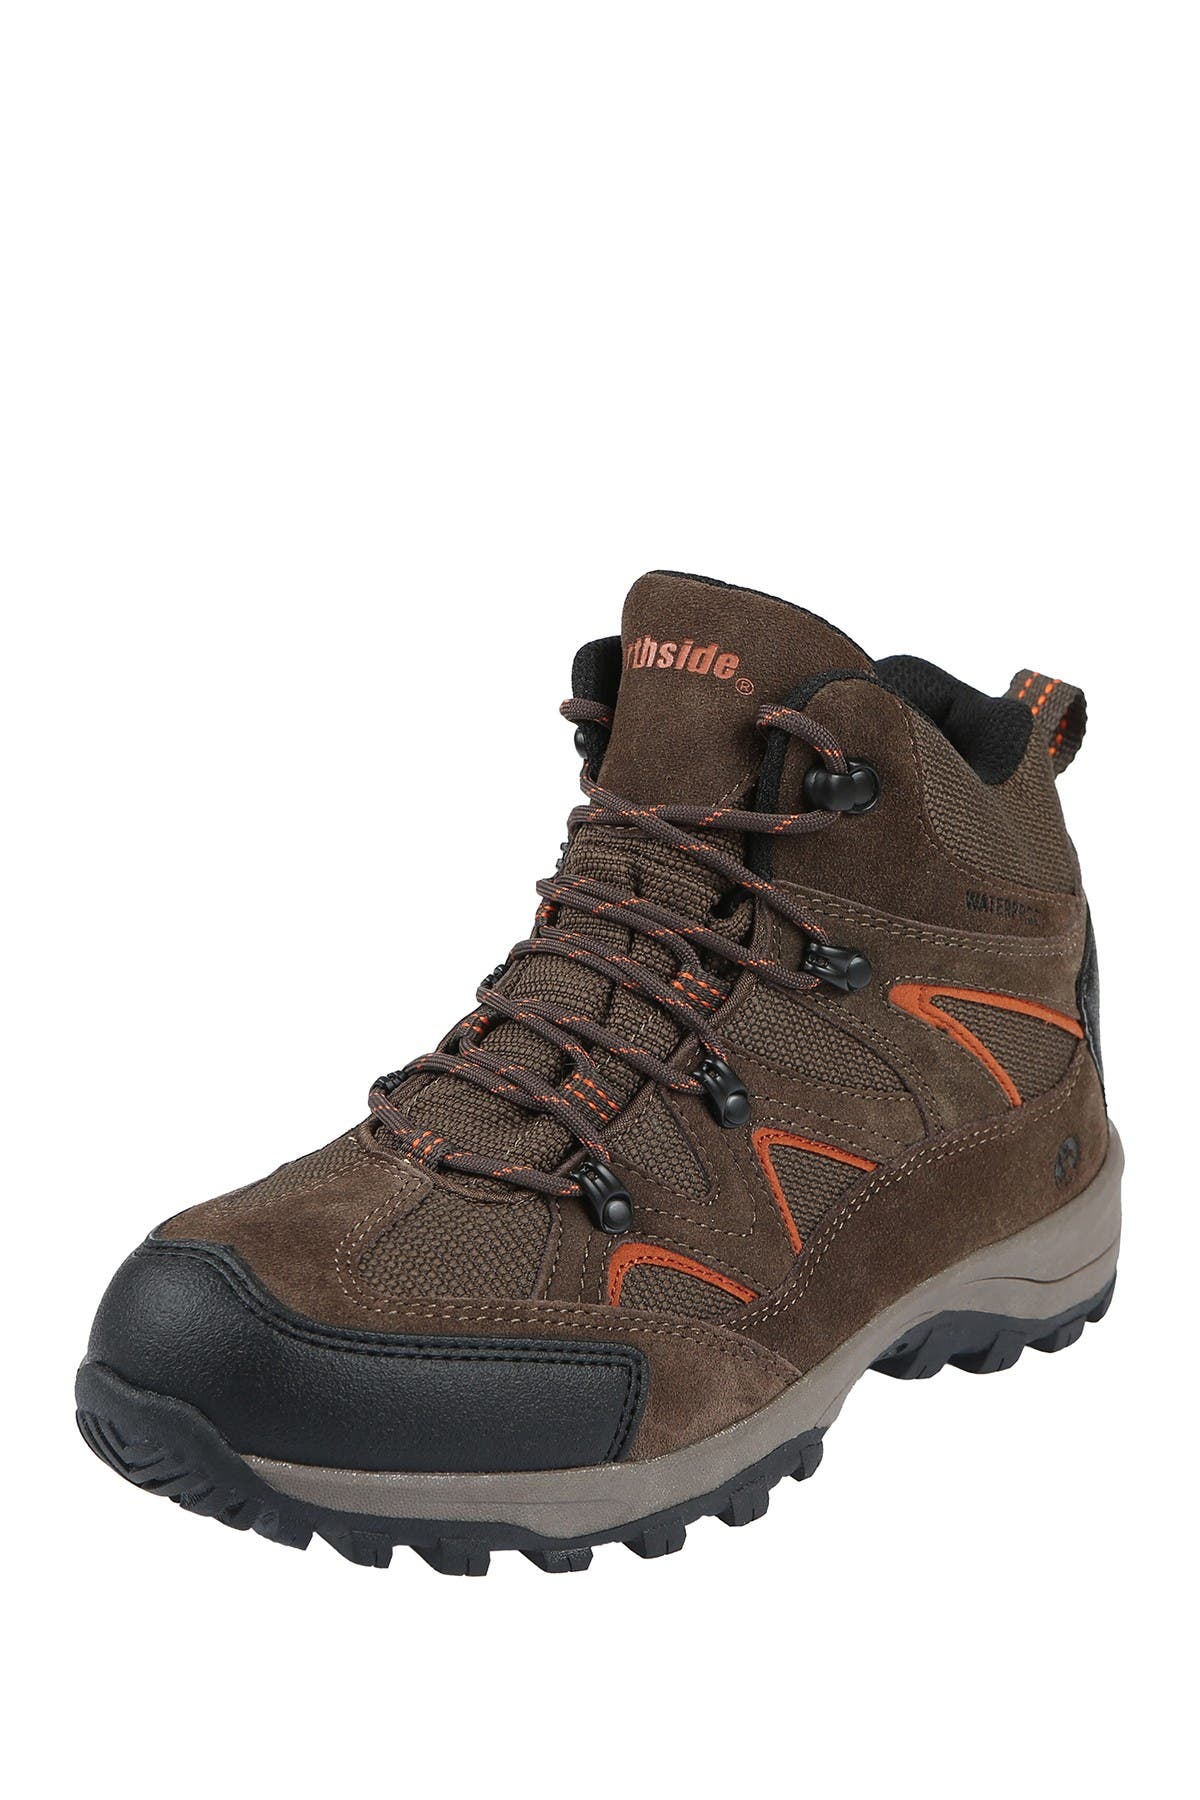 hiking boots in wide widths